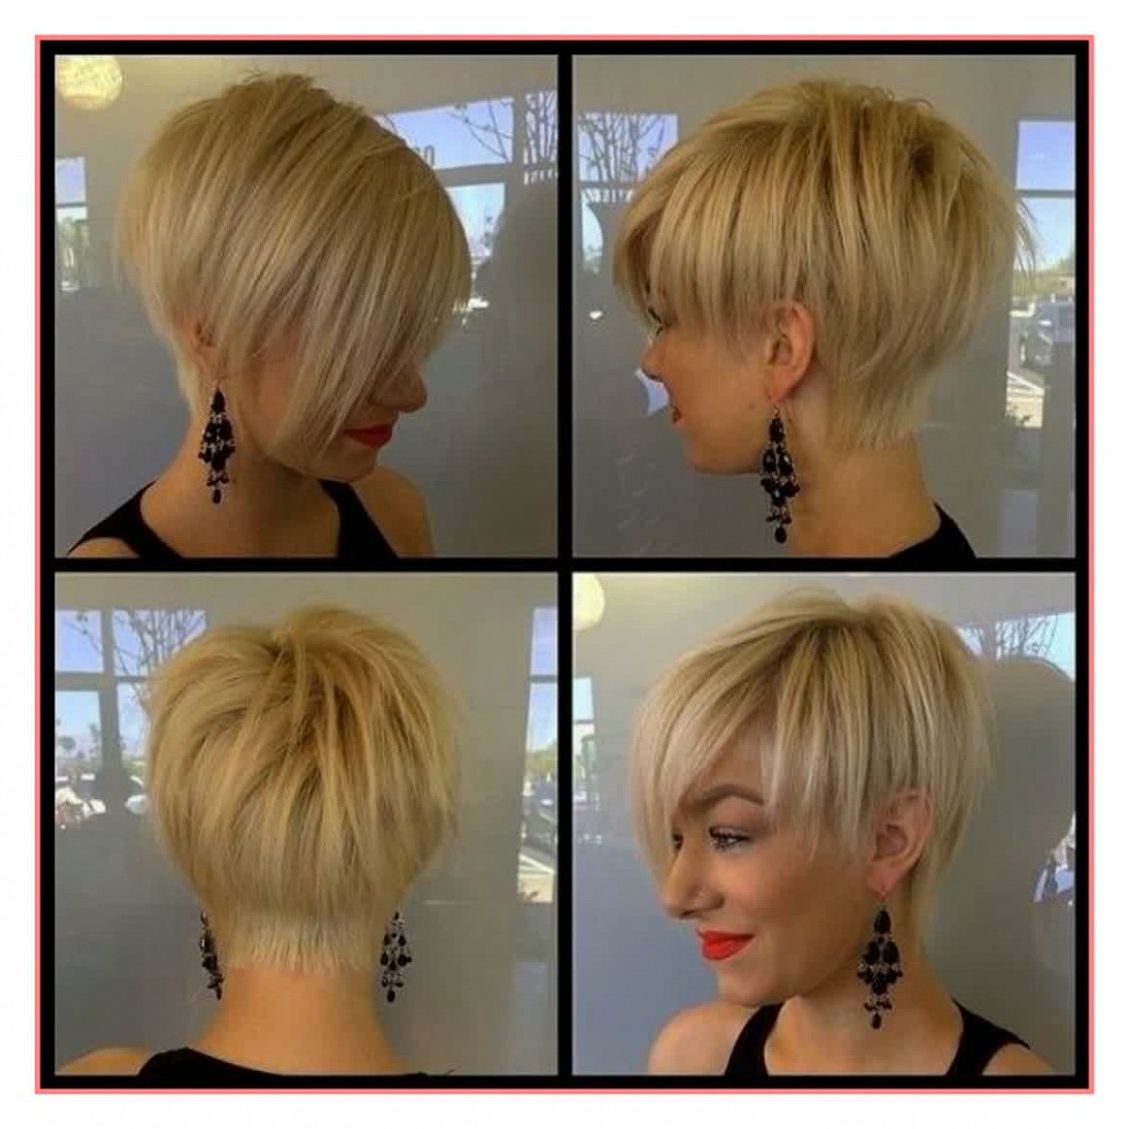 Cute Short Haircuts For Women With Fine Hair – Haircuts With Cute Short Haircuts For Fine Hair (View 19 of 25)